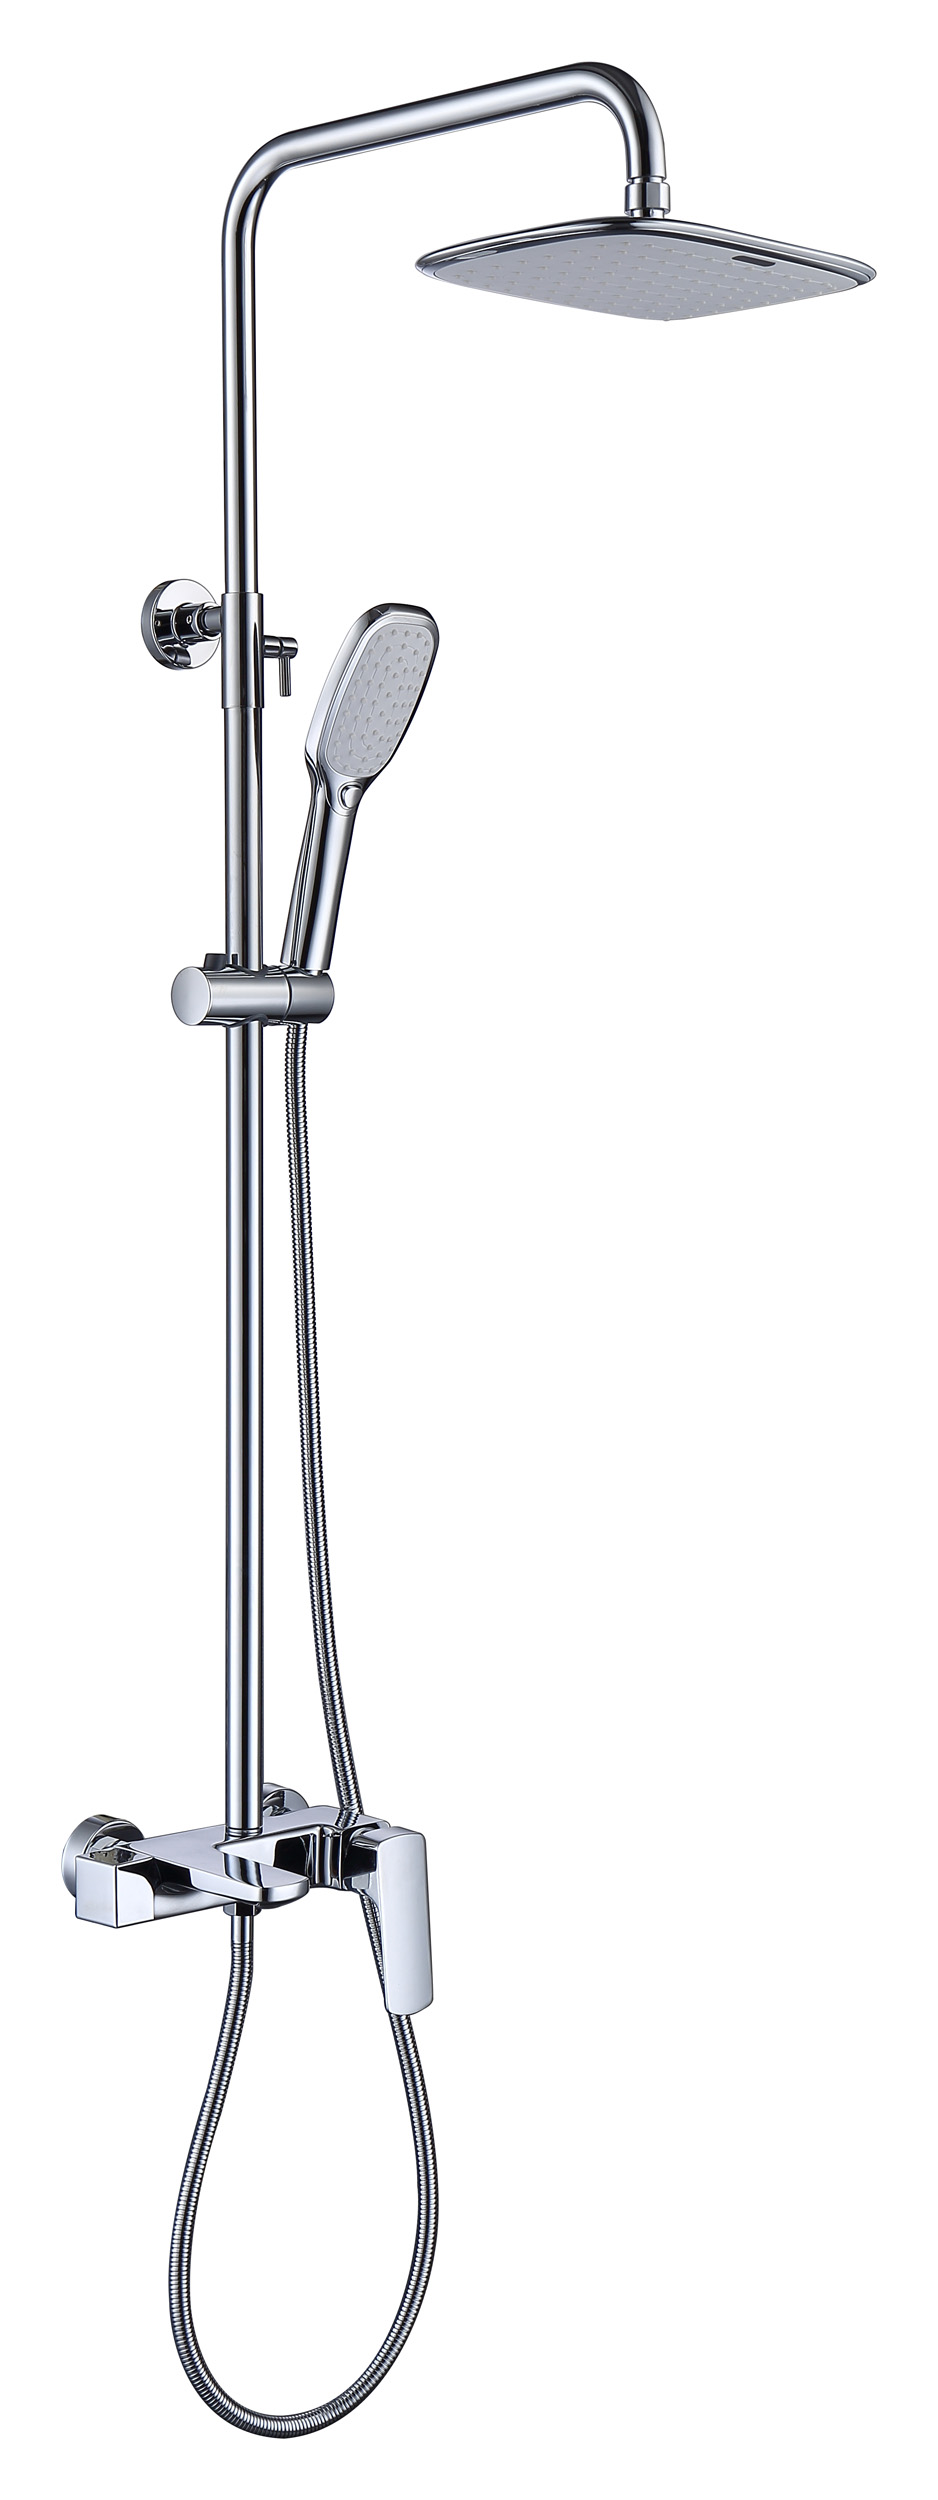 Wall Mounted Shower Mixer For Bathroom